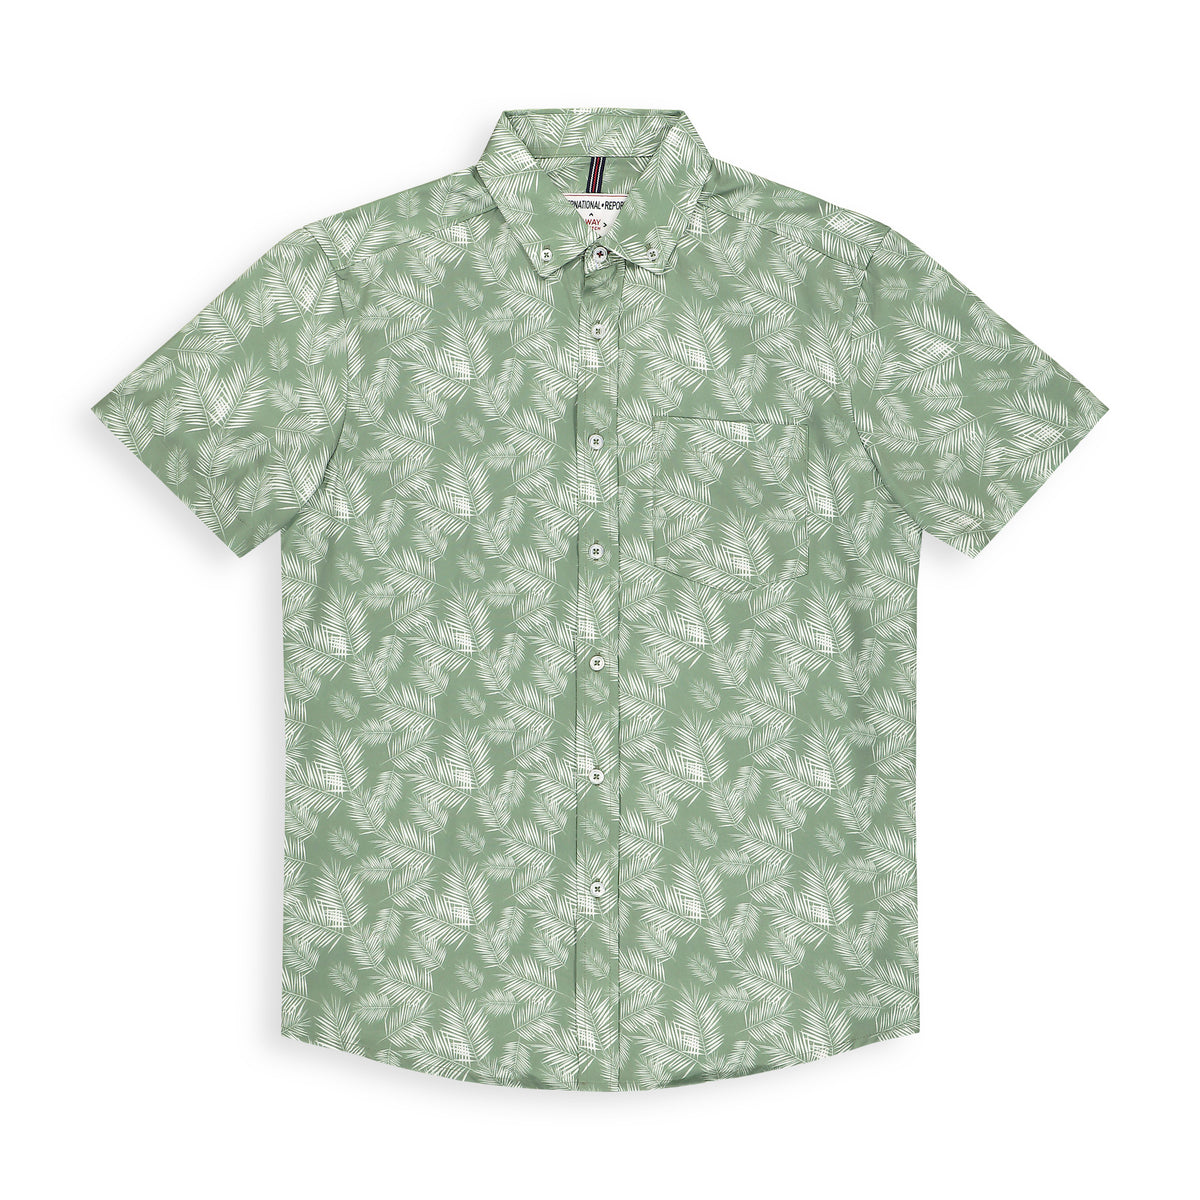 Front View of Short Sleeve 4-Way Stretch Shirt with Leaf Print in Green